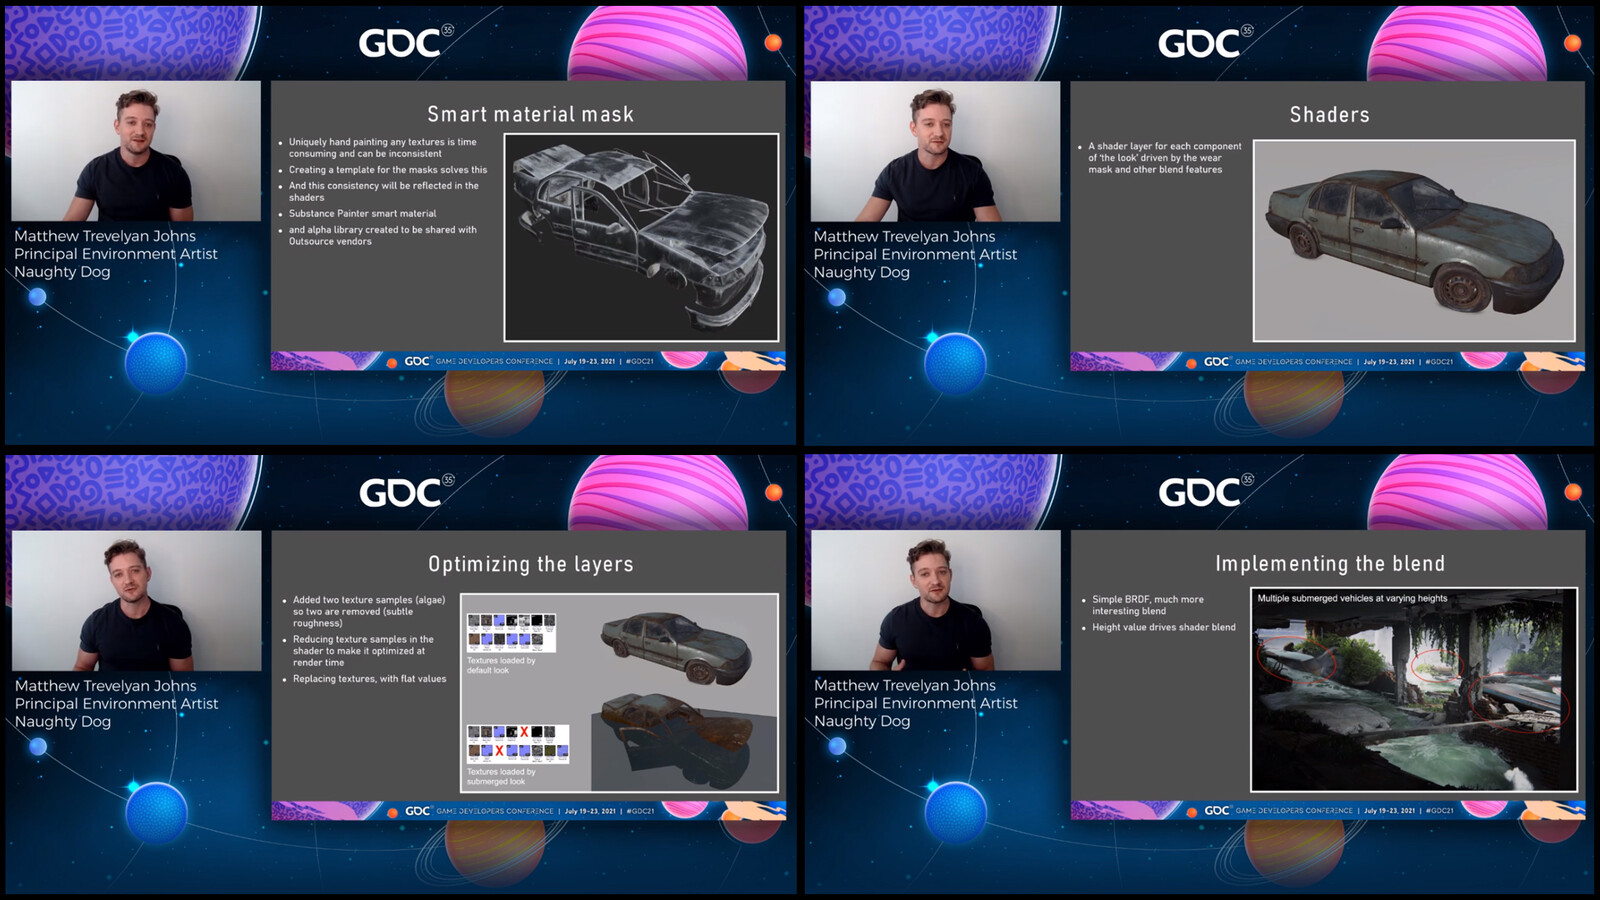 Here's a couple of screencaps to show the format of the hour long talk and a little sneak peak of some of the content. In total there were 107 slides with accompanying images and videos